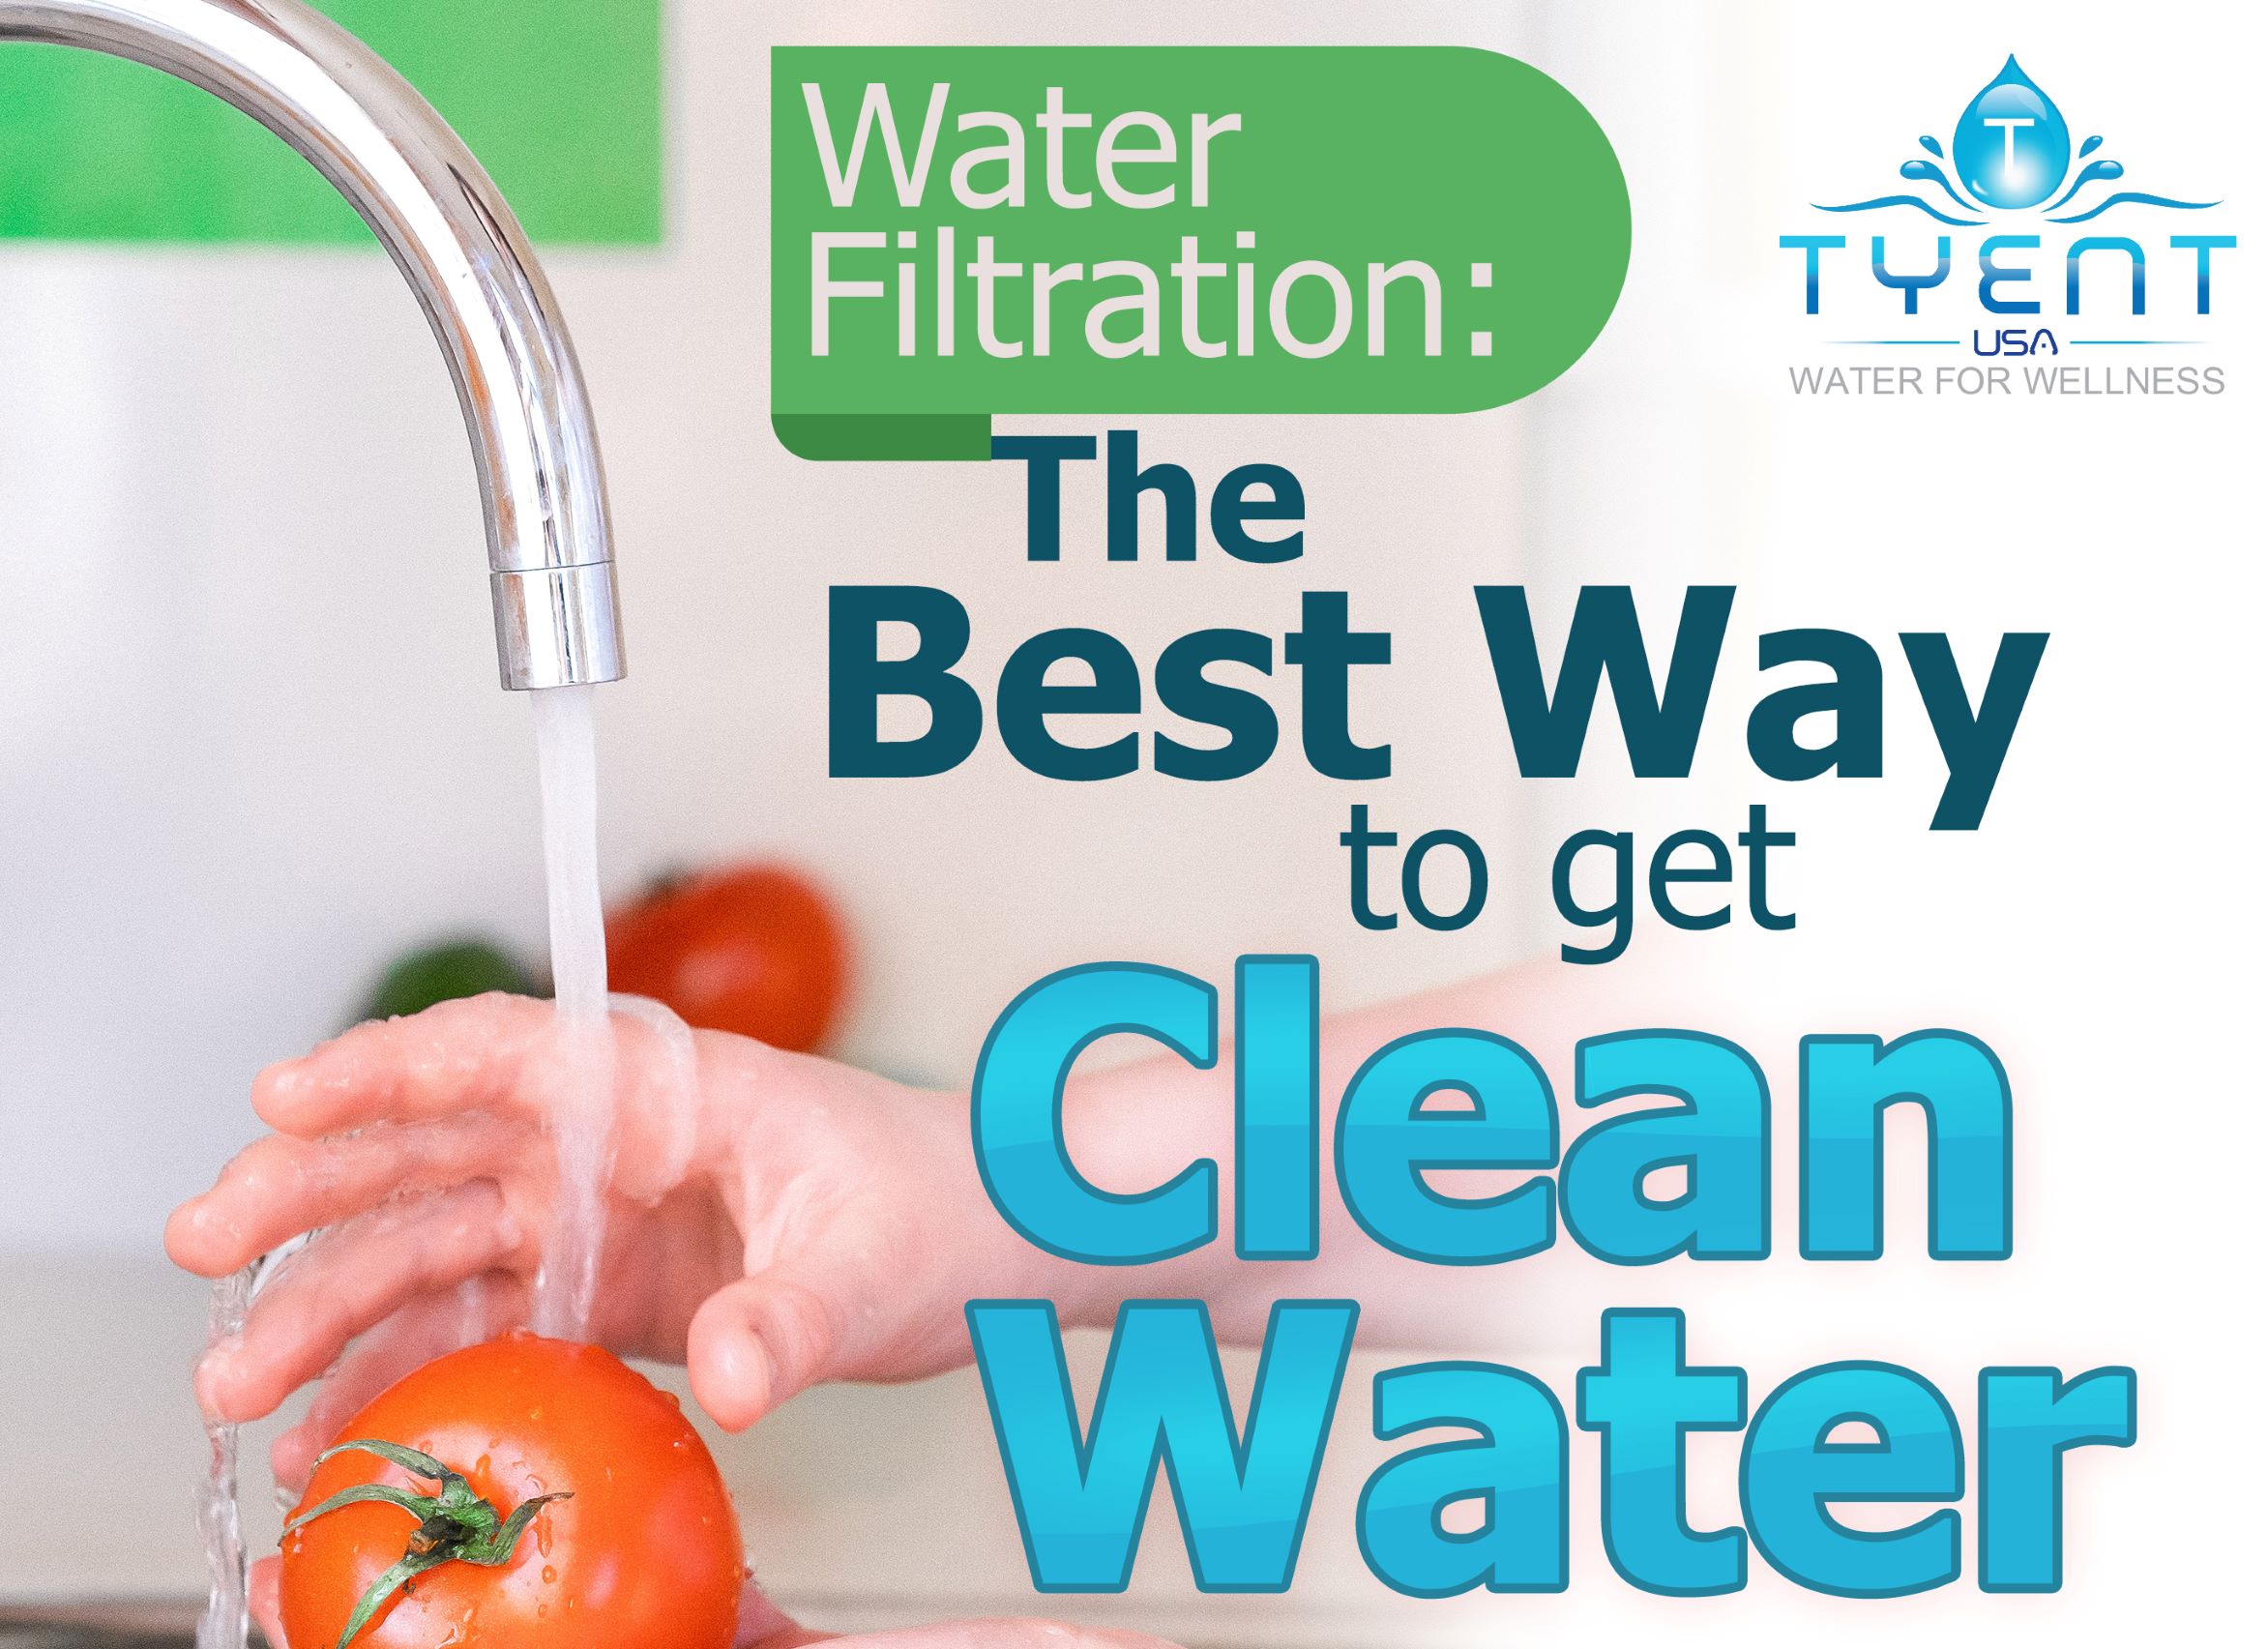 Water Filtration - The Best Way to Get Clean Water